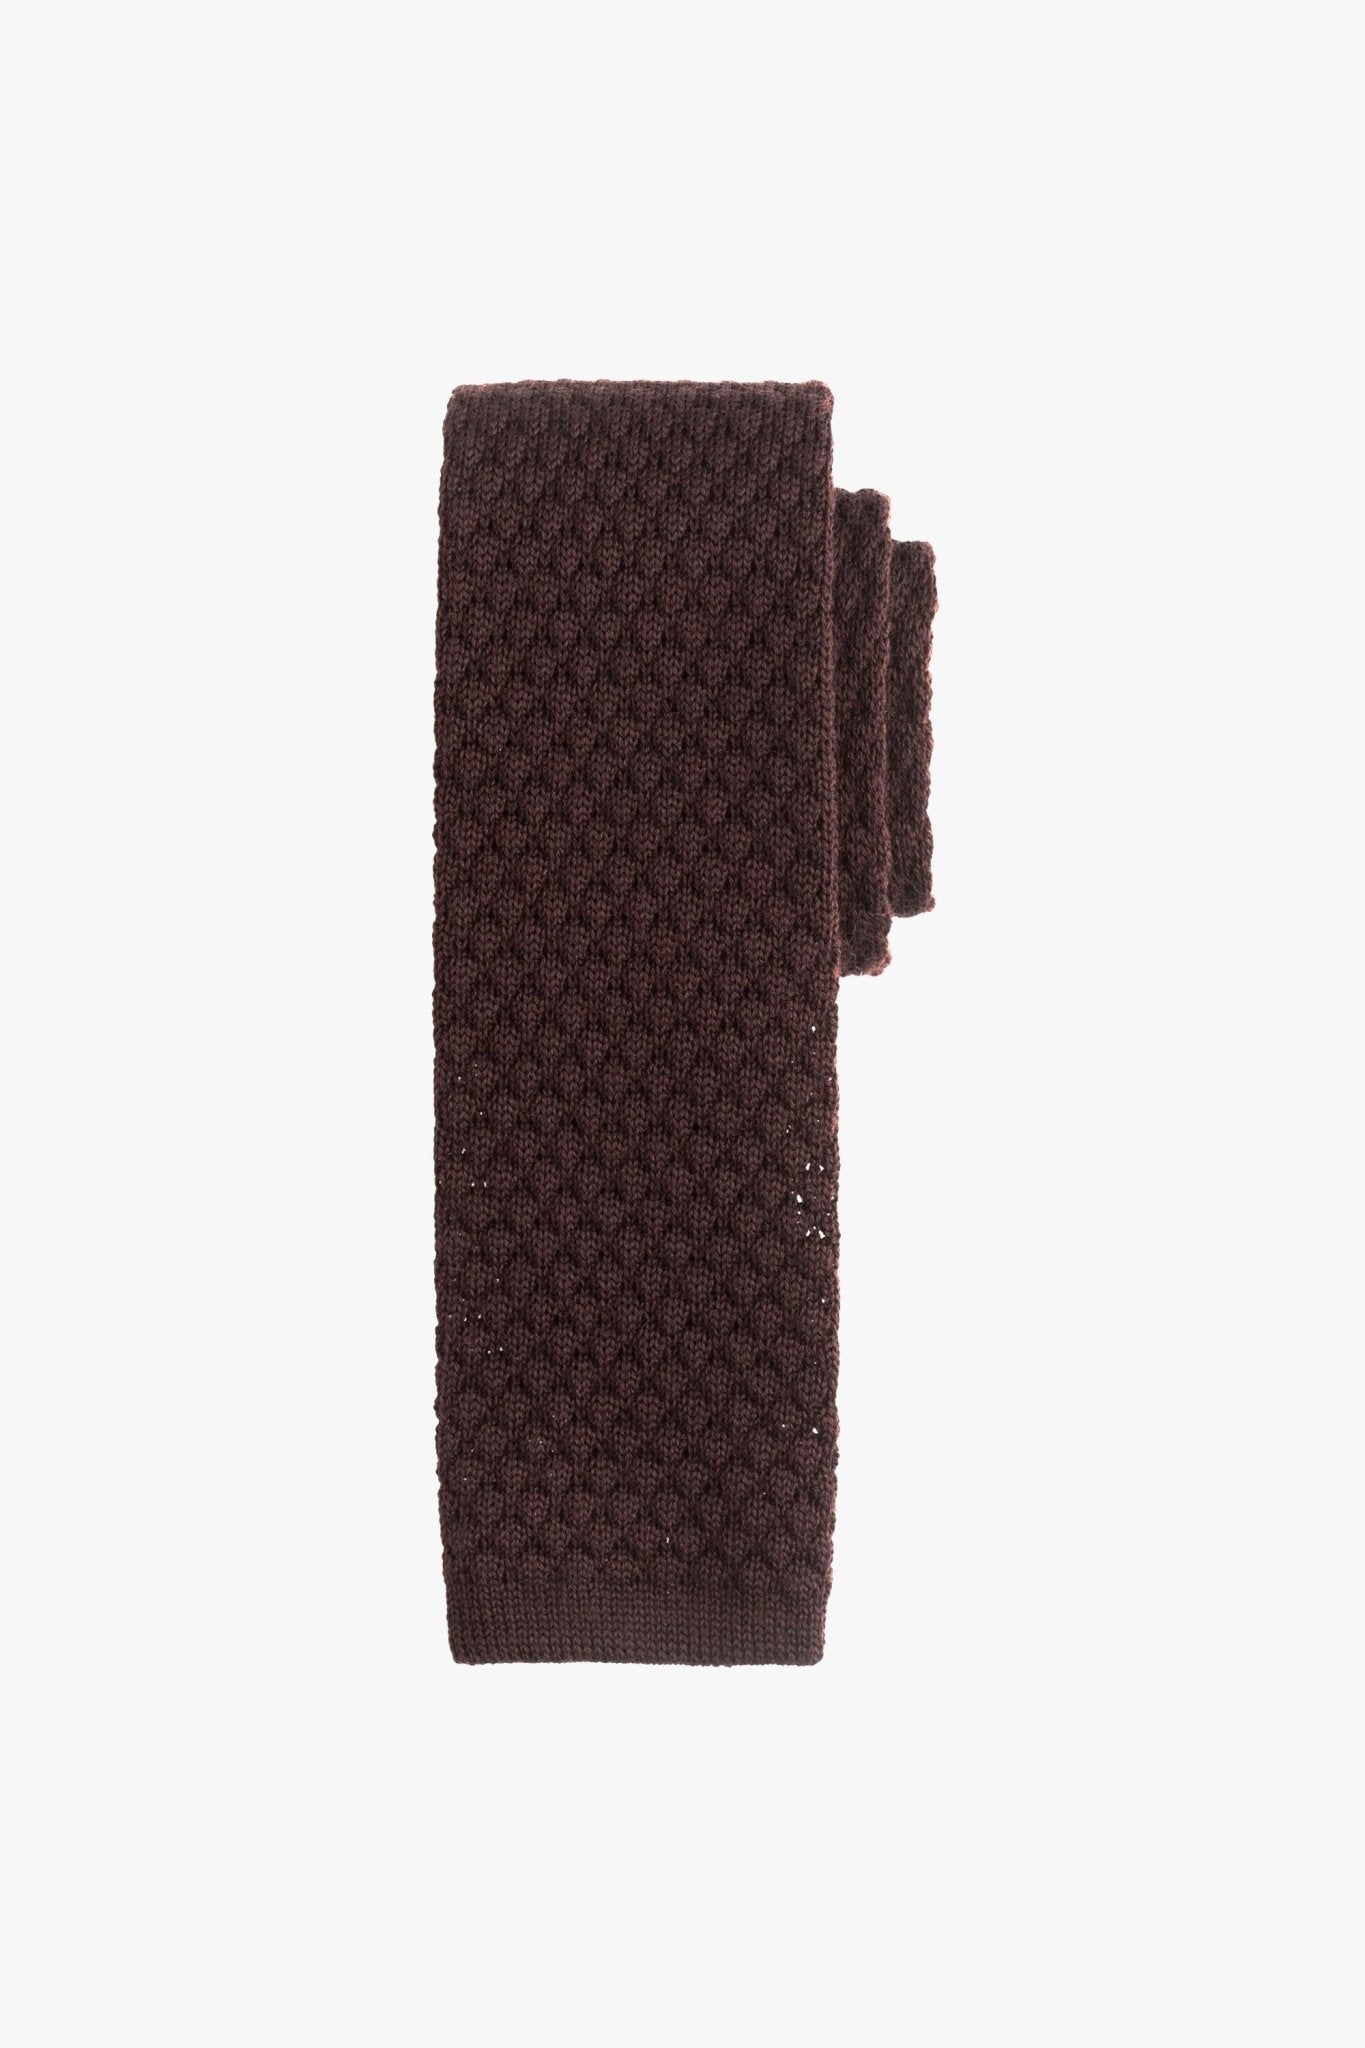 Brown Knitted Tie - My Suited Life